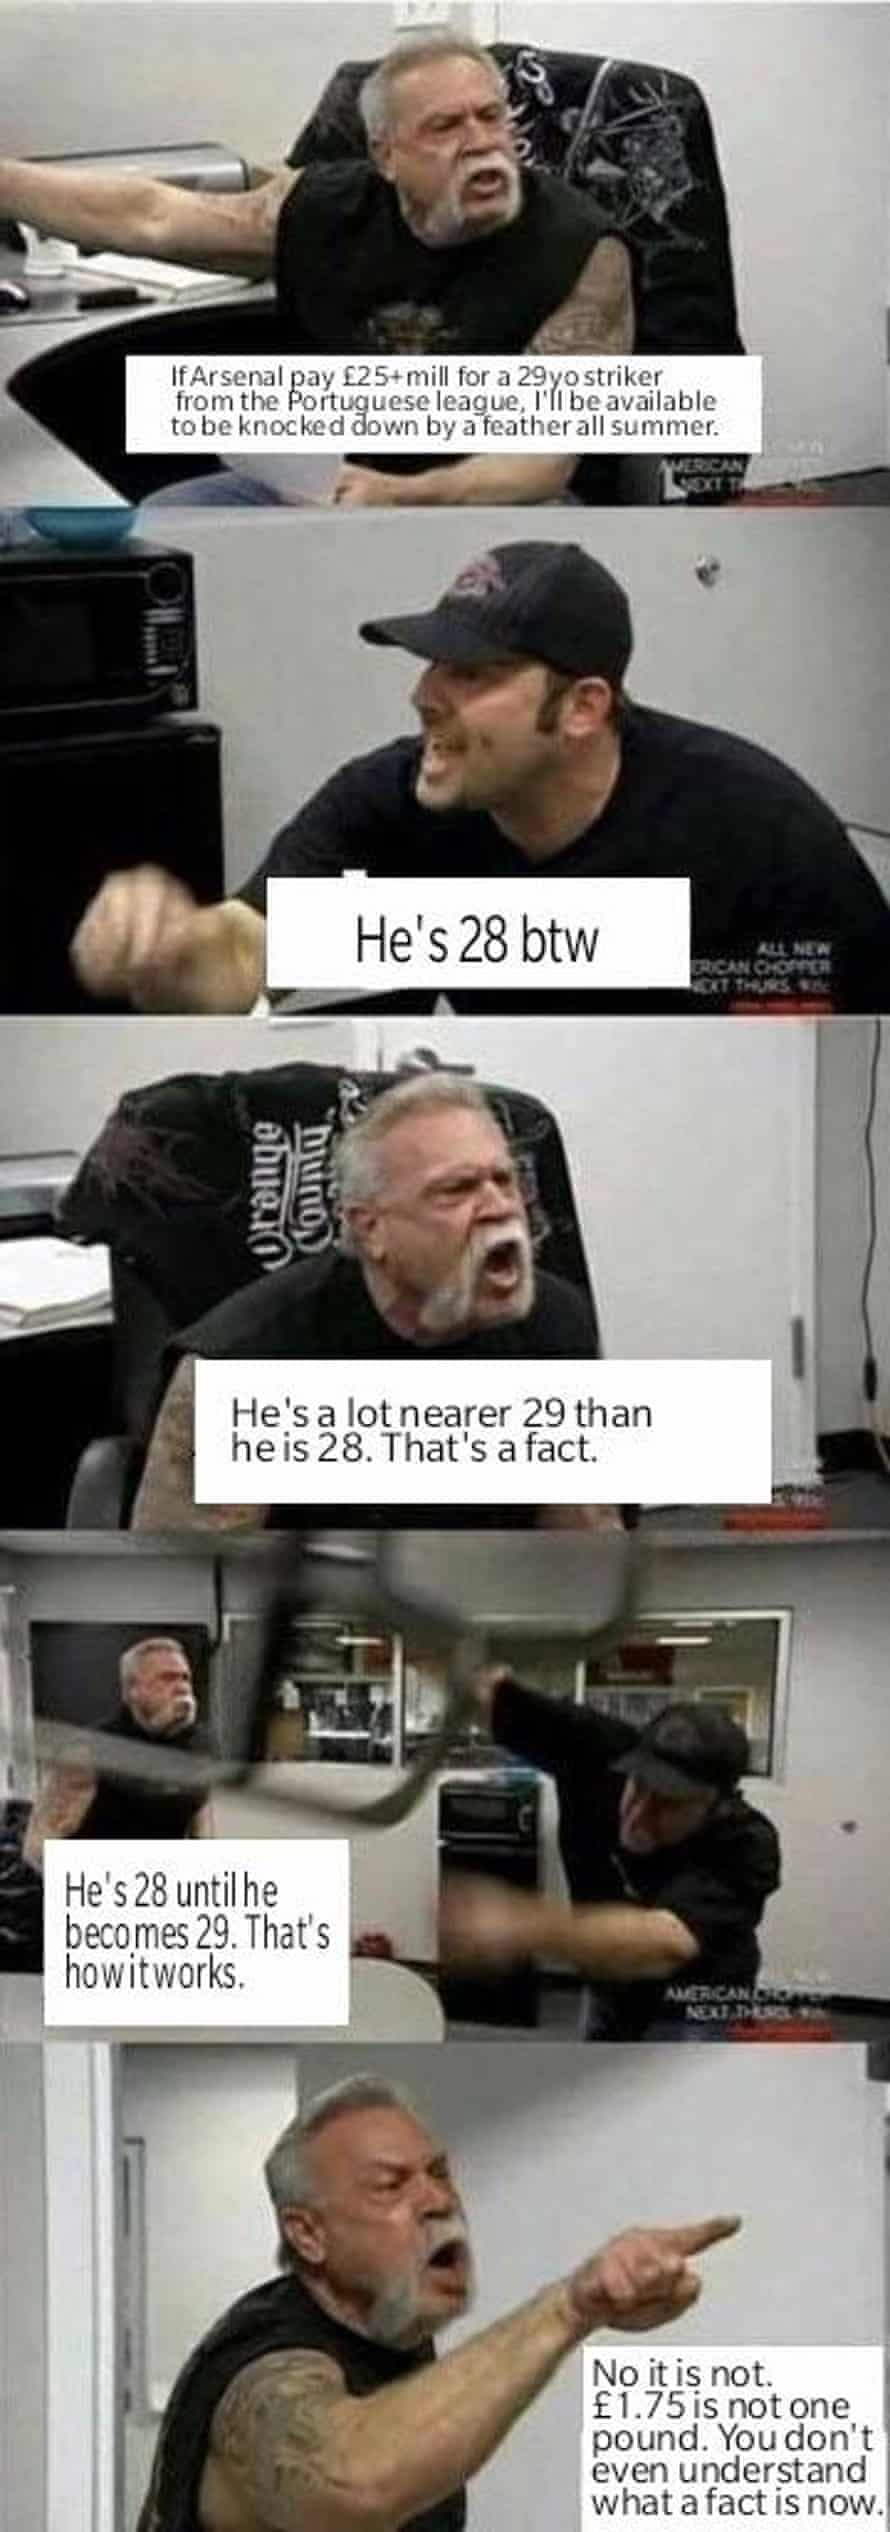 The American Chopper meme using quotes from a notorious social media row about the age of Jackson Martinez.